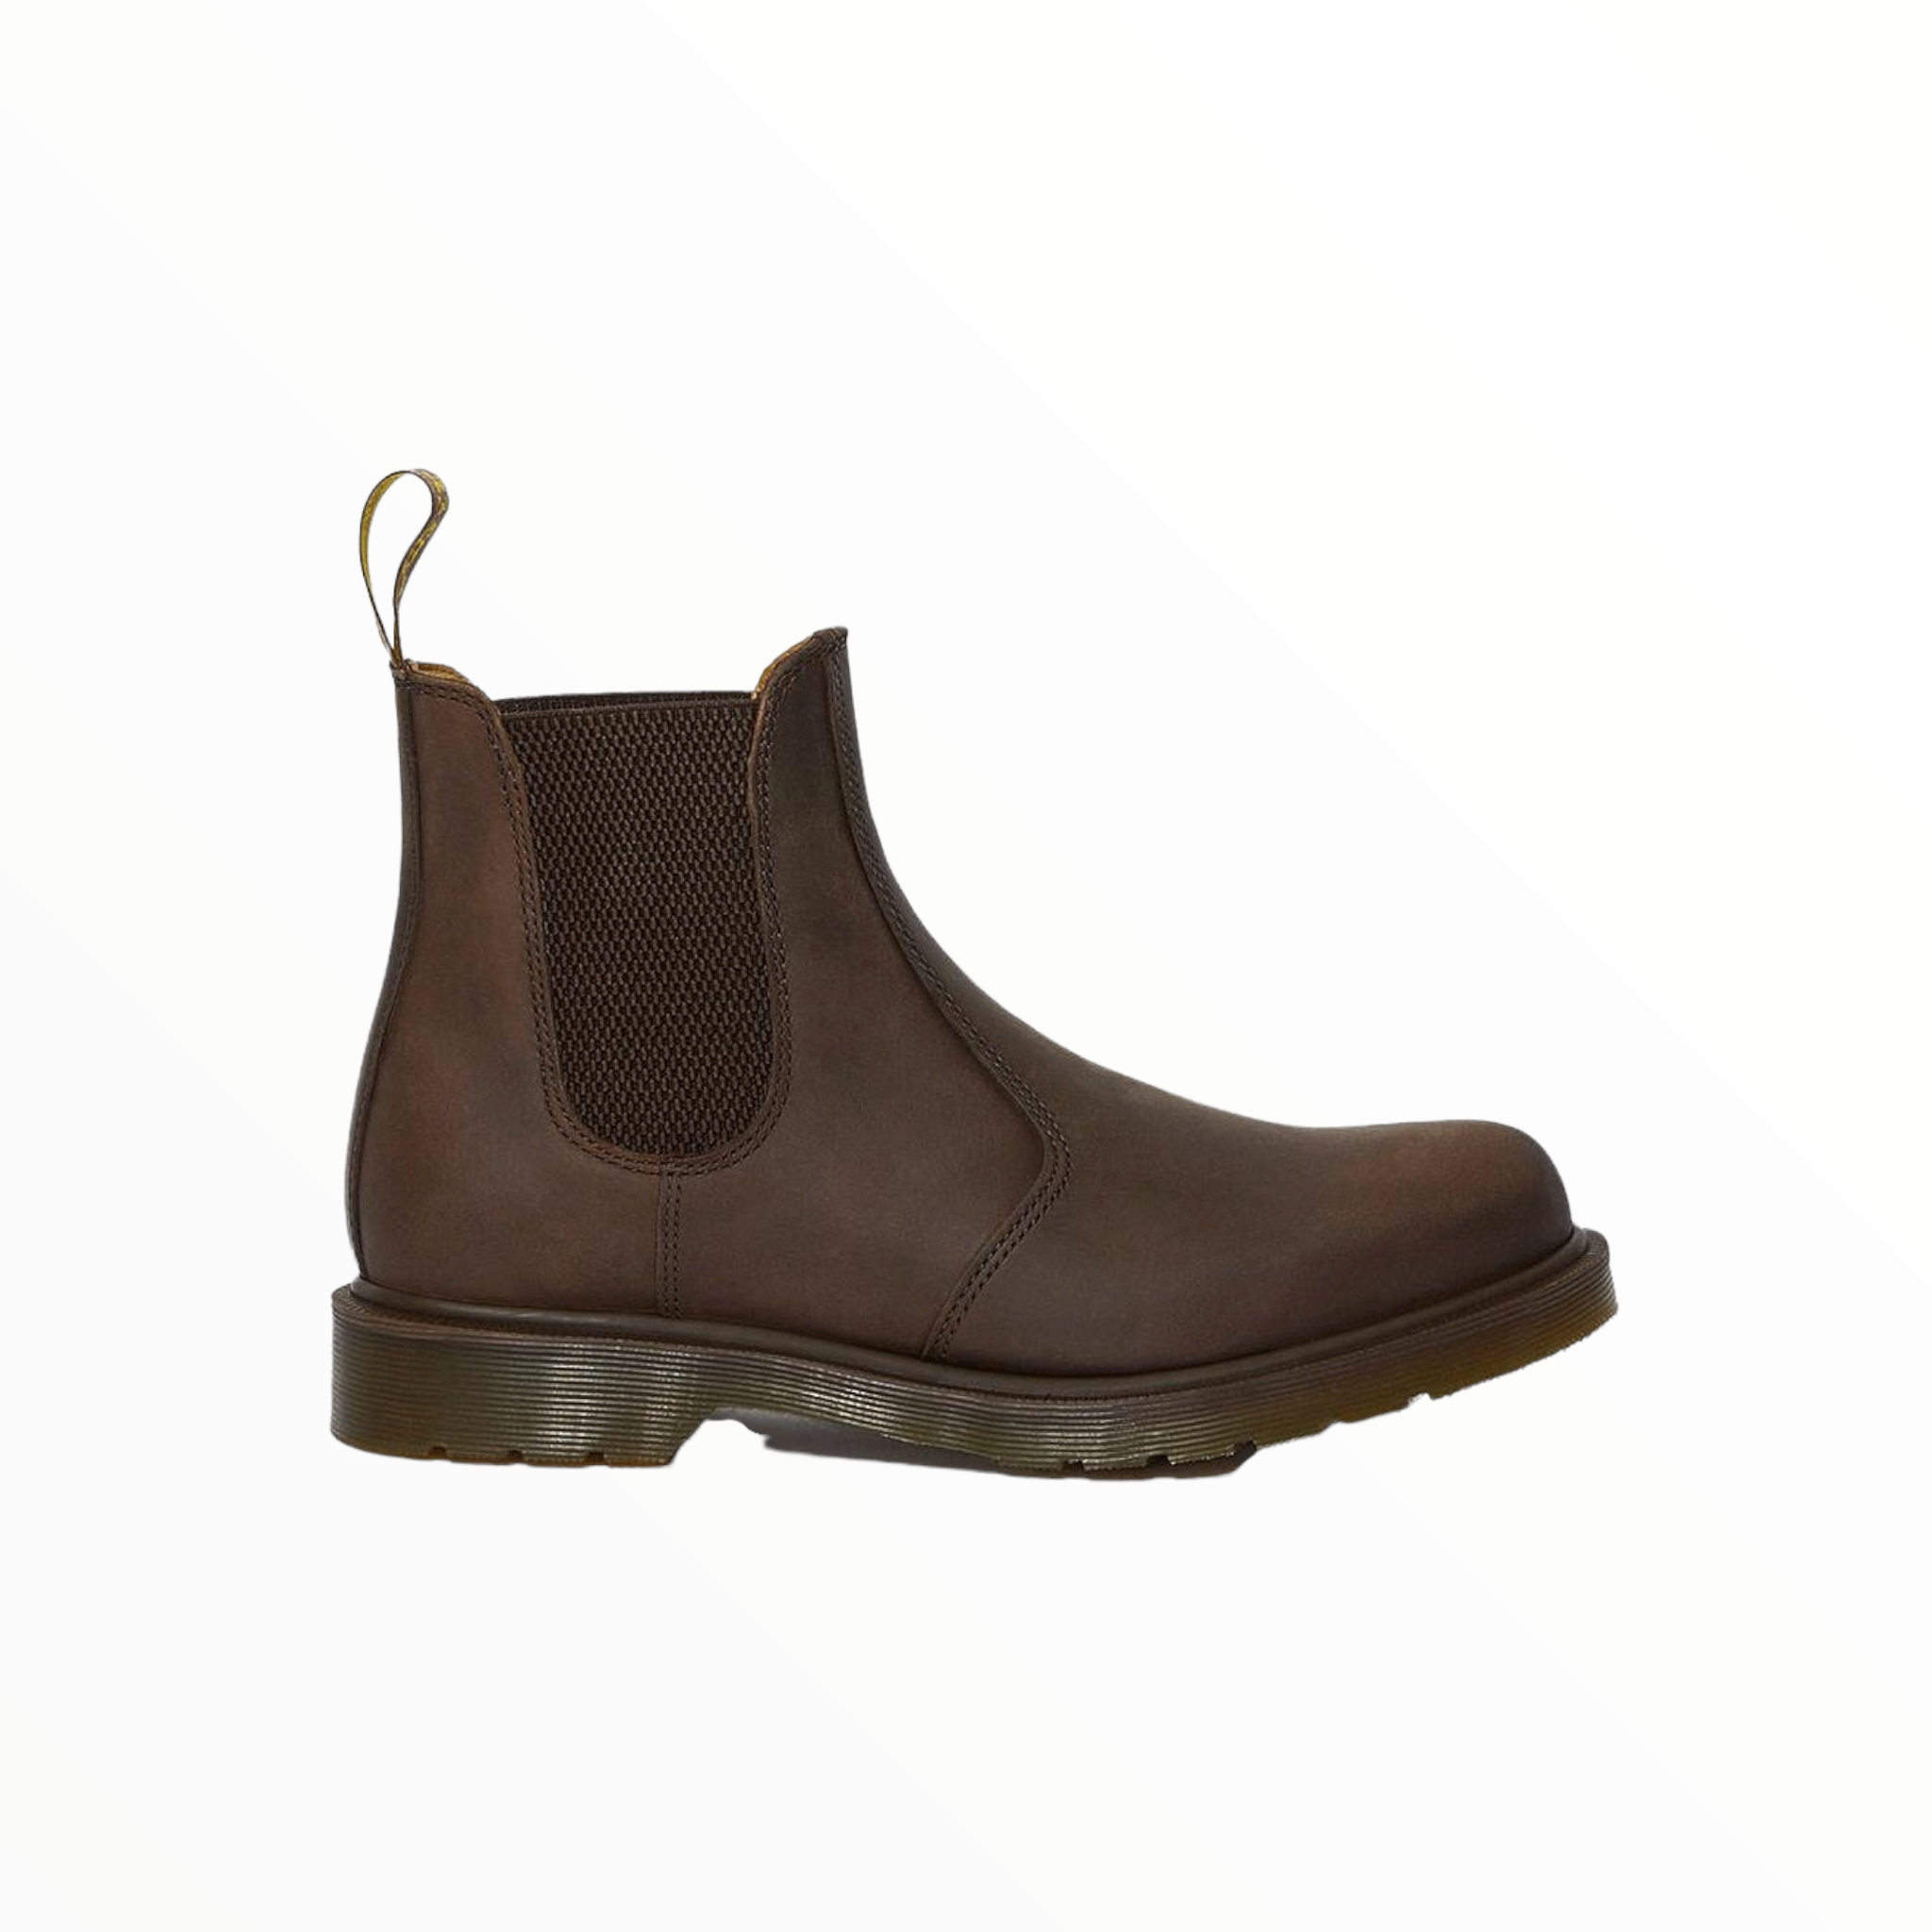 Shop 2976 Chelsea Dr Martens - with shoe&me - from Dr. Martens - Boots - Boot, Mens, Winter, Womens - [collection]